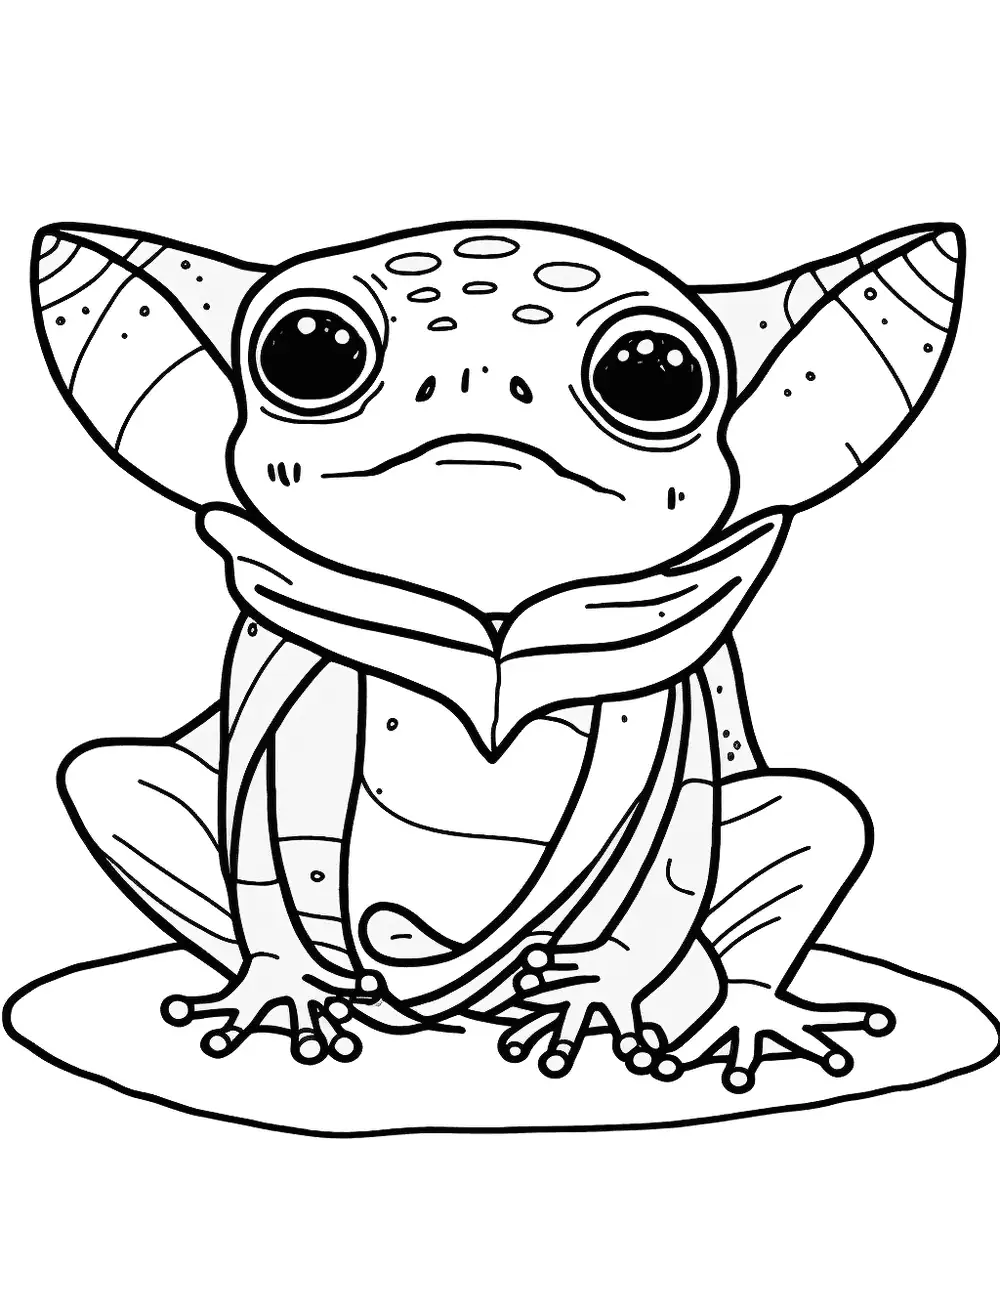 Baby Yoda Frog Coloring Page - A frog dressed as Baby Yoda, with green skin and big ears